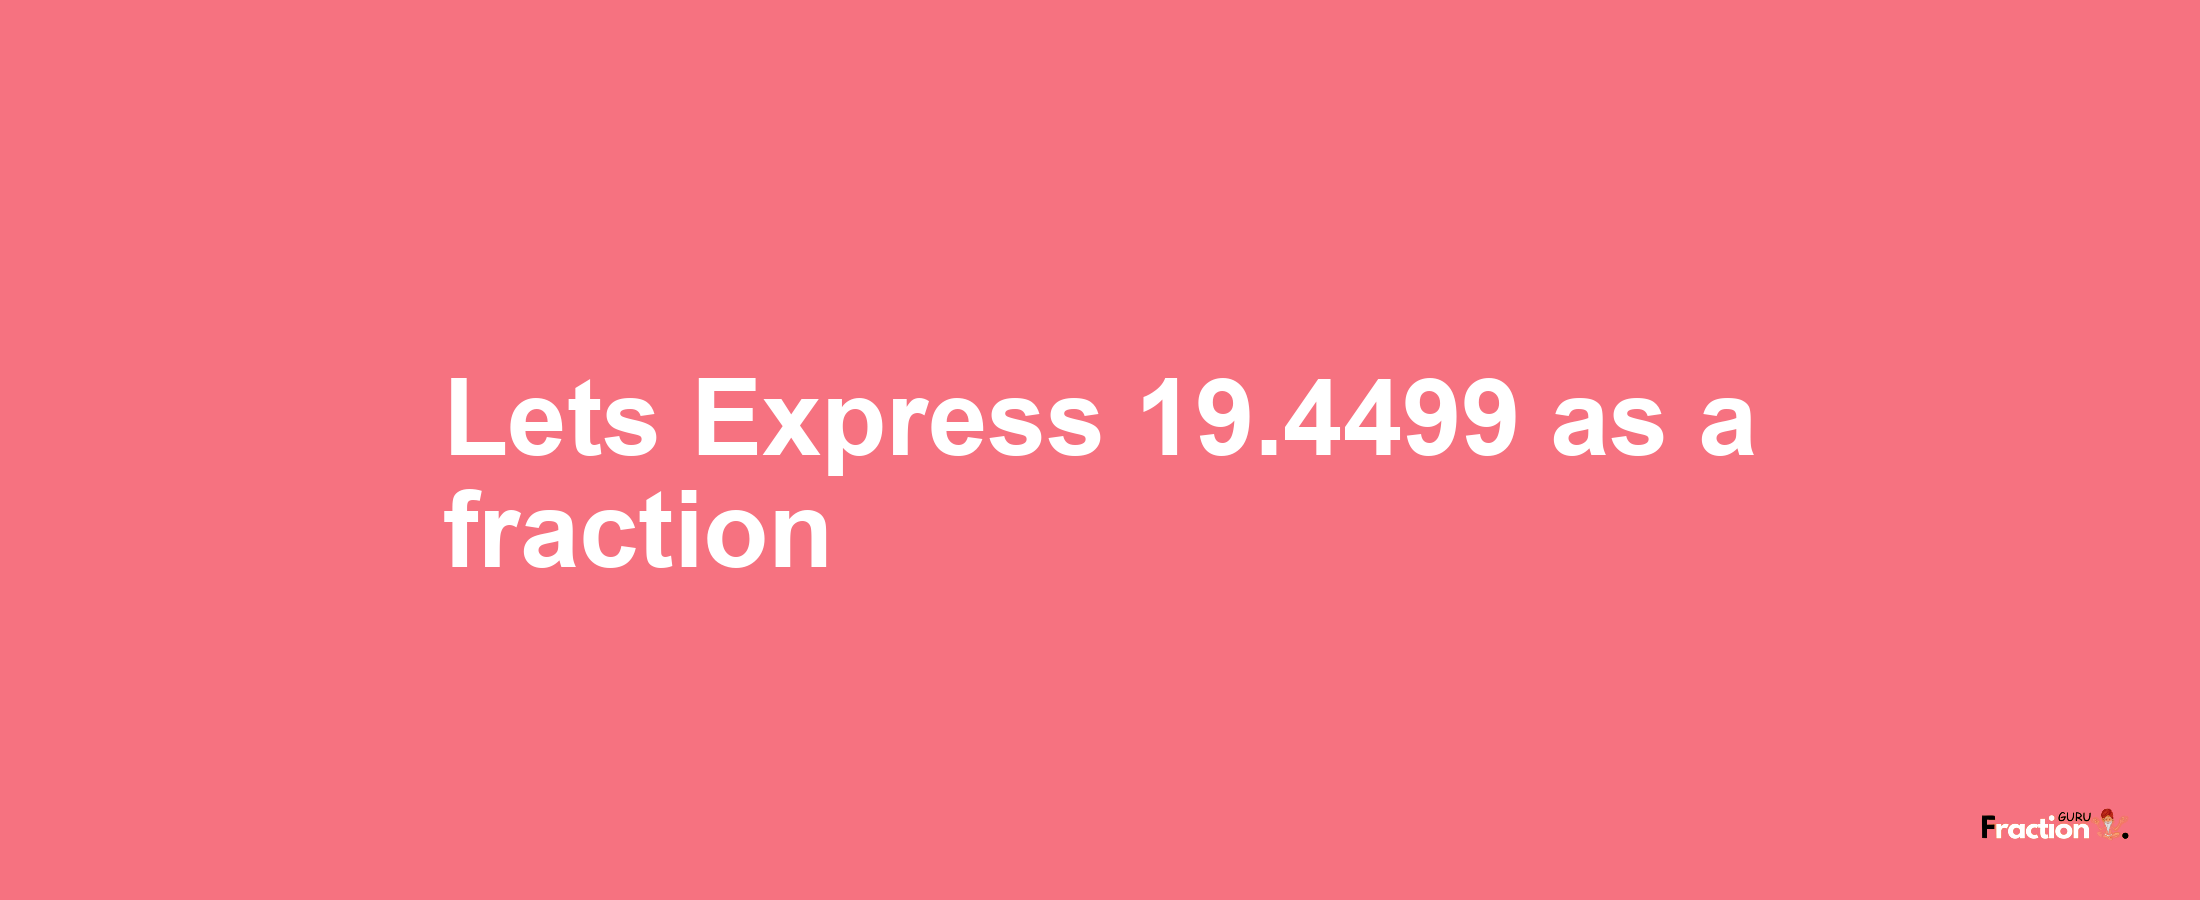 Lets Express 19.4499 as afraction